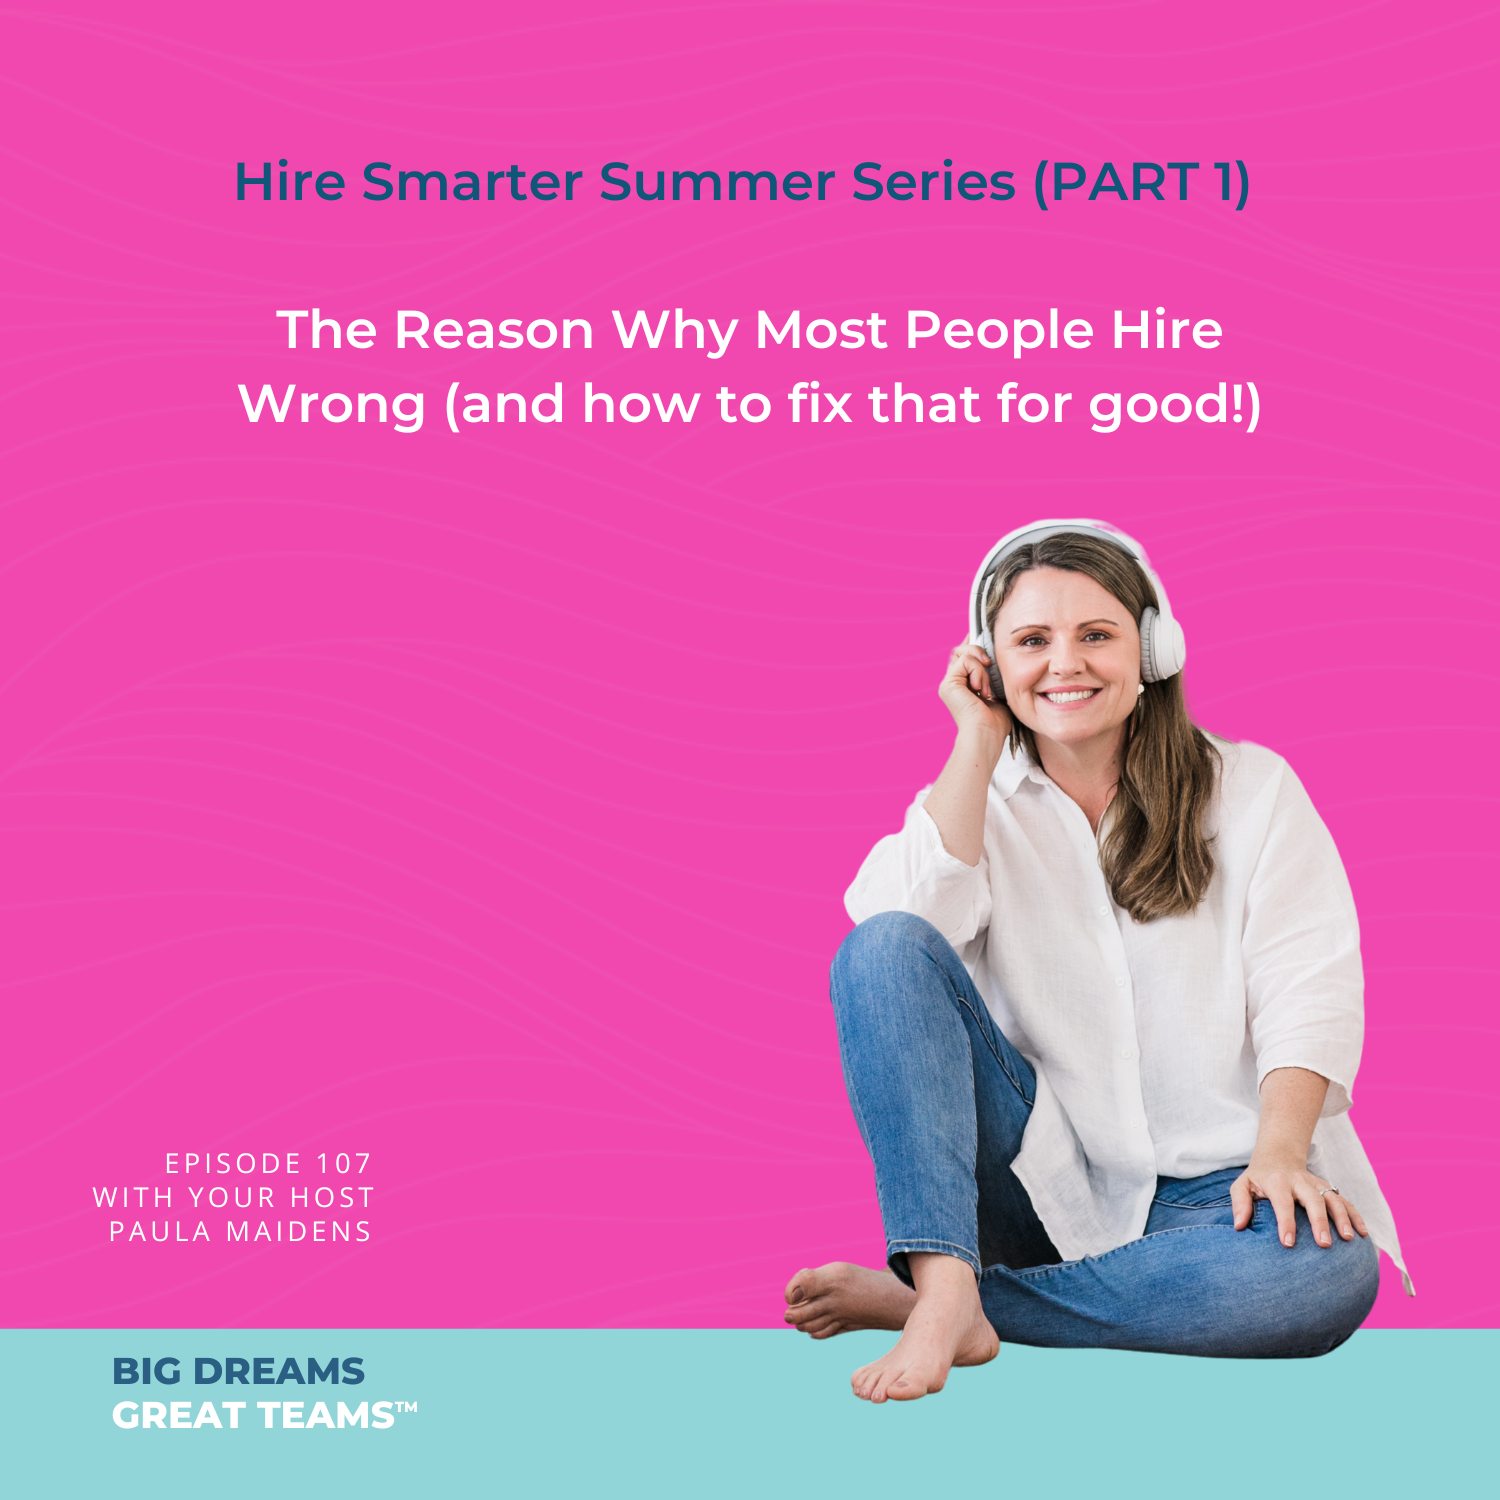 Episode #107 - Hire Smarter Summer Series (Part 1) - The Reason Why Most People Hire Wrong (and how to fix that for good!)